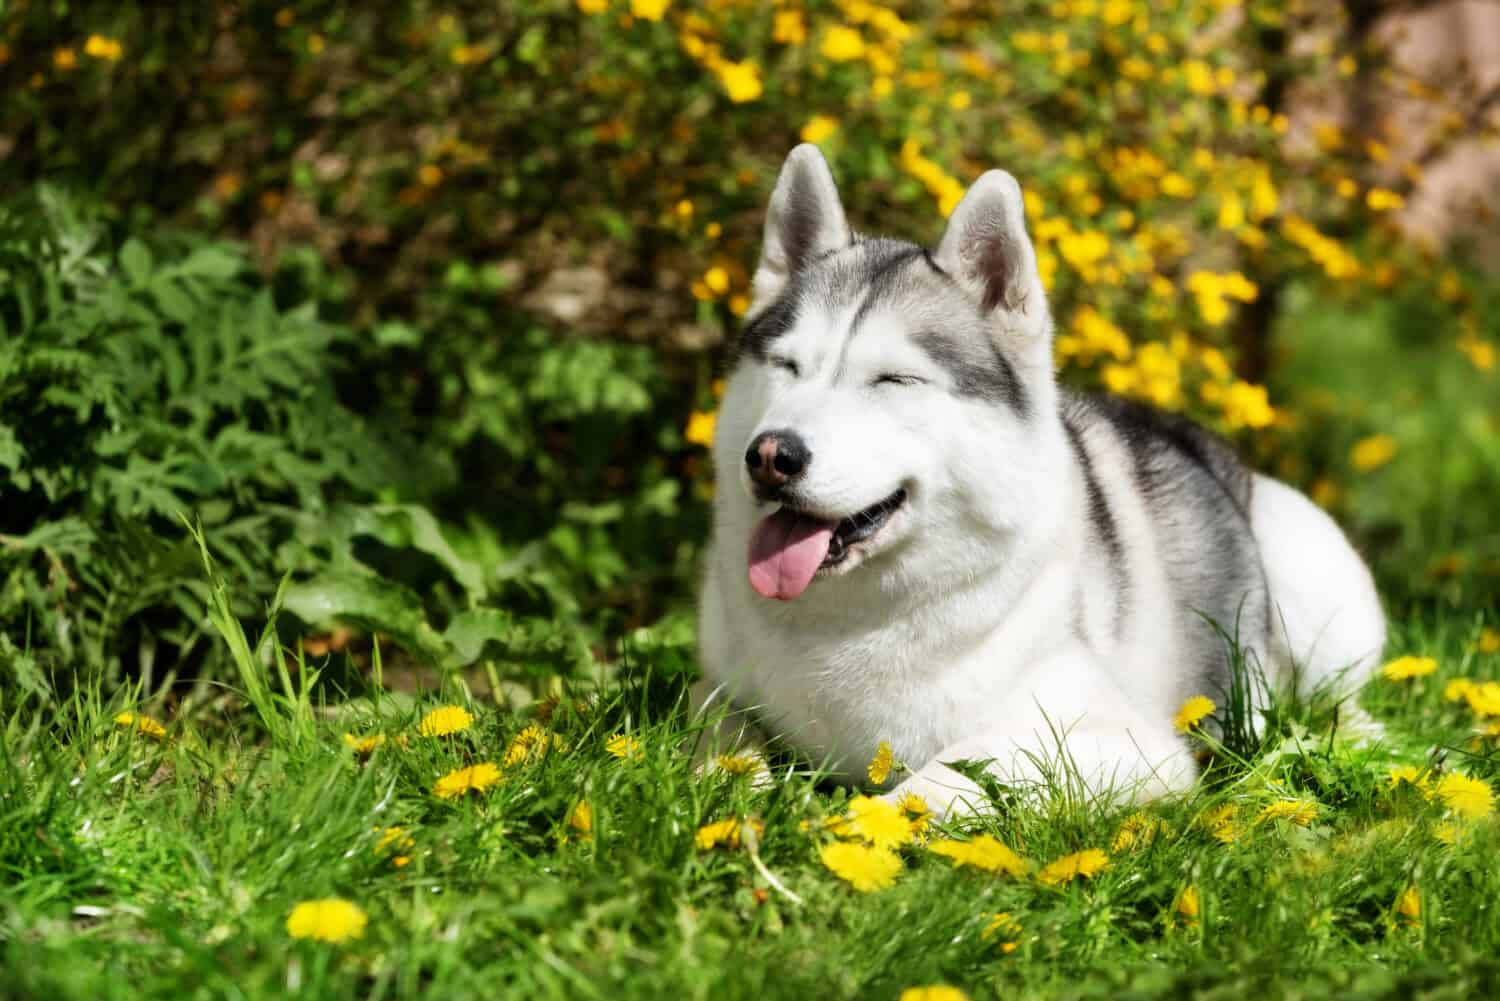 A pregnant mature Siberian husky female dog is lying down on green grass near yellow flowers. There are some dandelions around her. A bitch has grey and white fur, her eyes are closed.